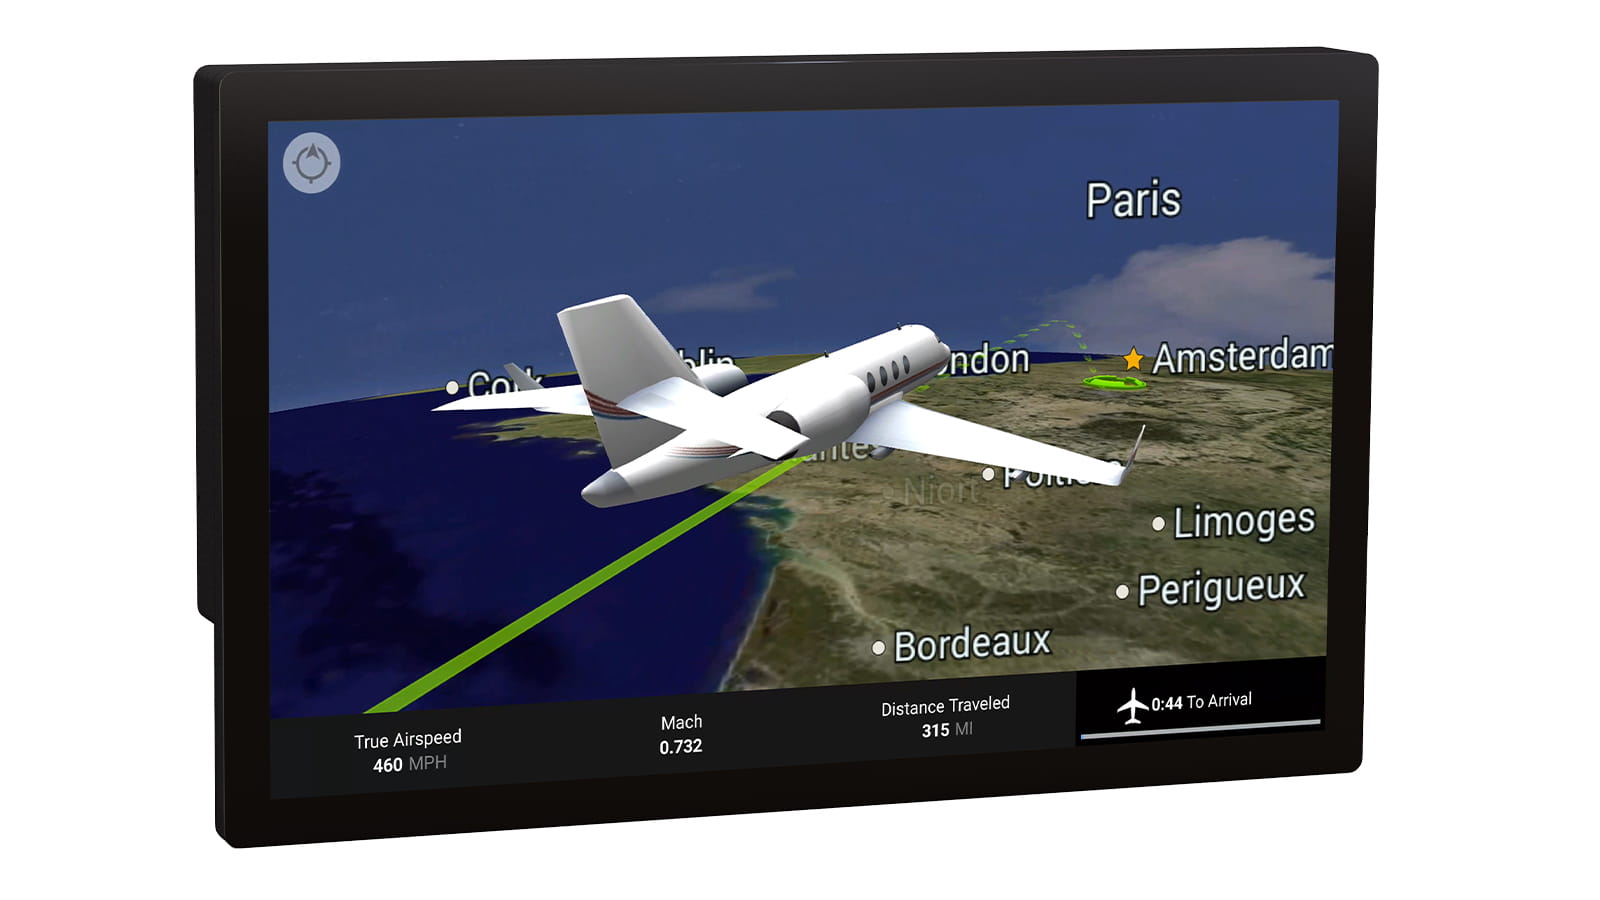 Collins Aerospace’s Venue™ smart monitor enhances the business jet cabin experience, providing operators incremental growth paths and integration options for cabin management and in-flight entertainment solutions.